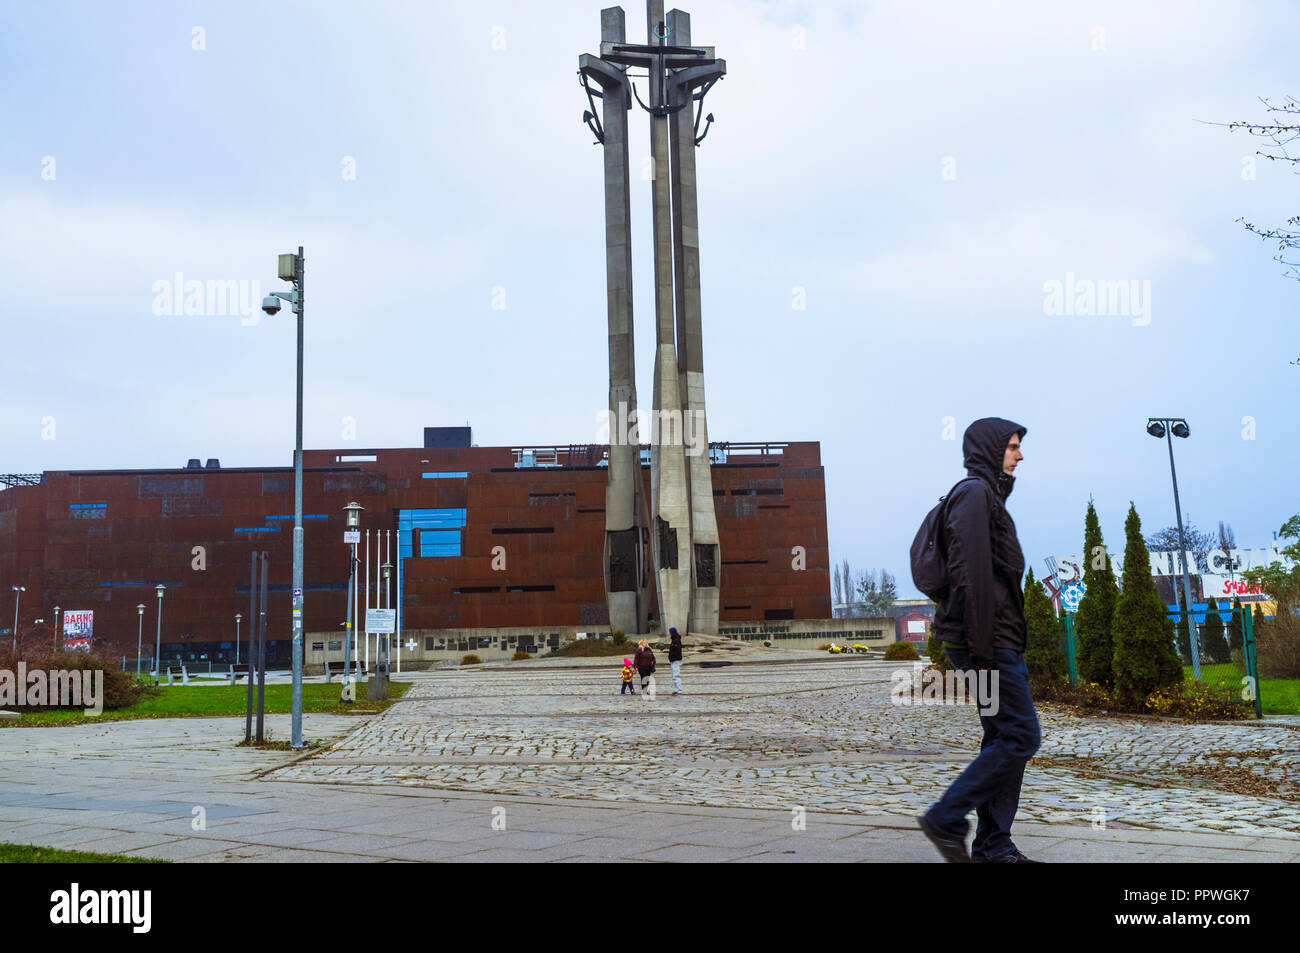 Gdansk, Pomerania, Poland : A man walks through Solidarity Square. In background, the European Solidarity Centre (opened 2014) next to the entrance to Stock Photo